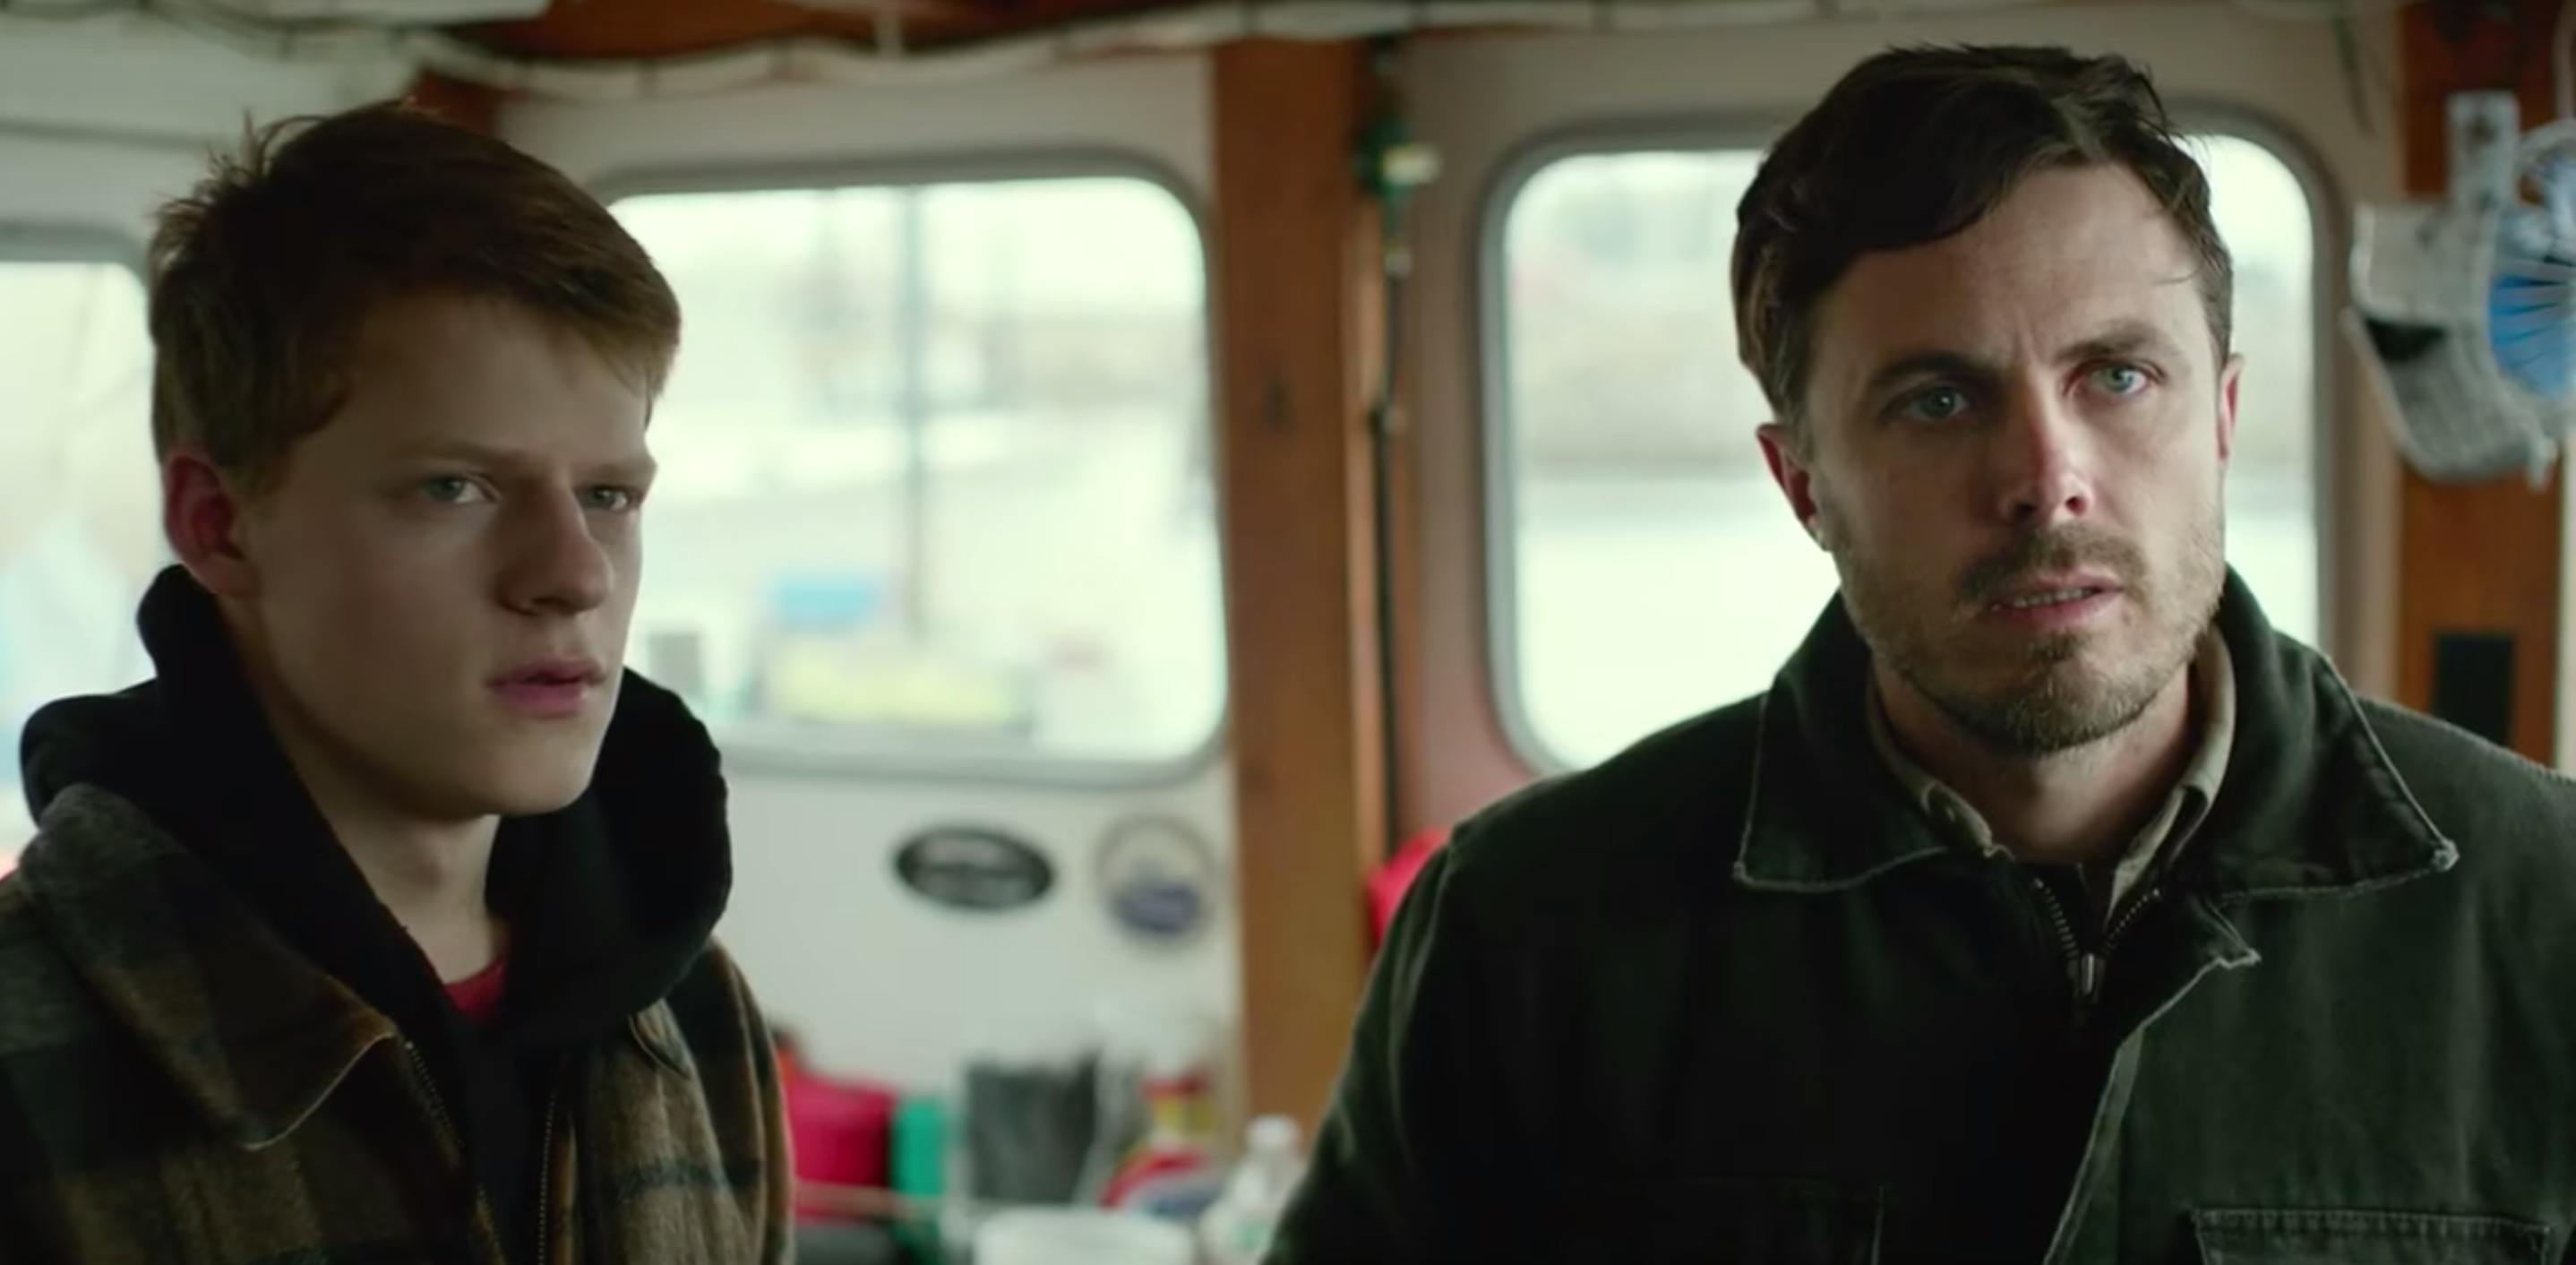 Amazon 4k movies: Manchester by the Sea